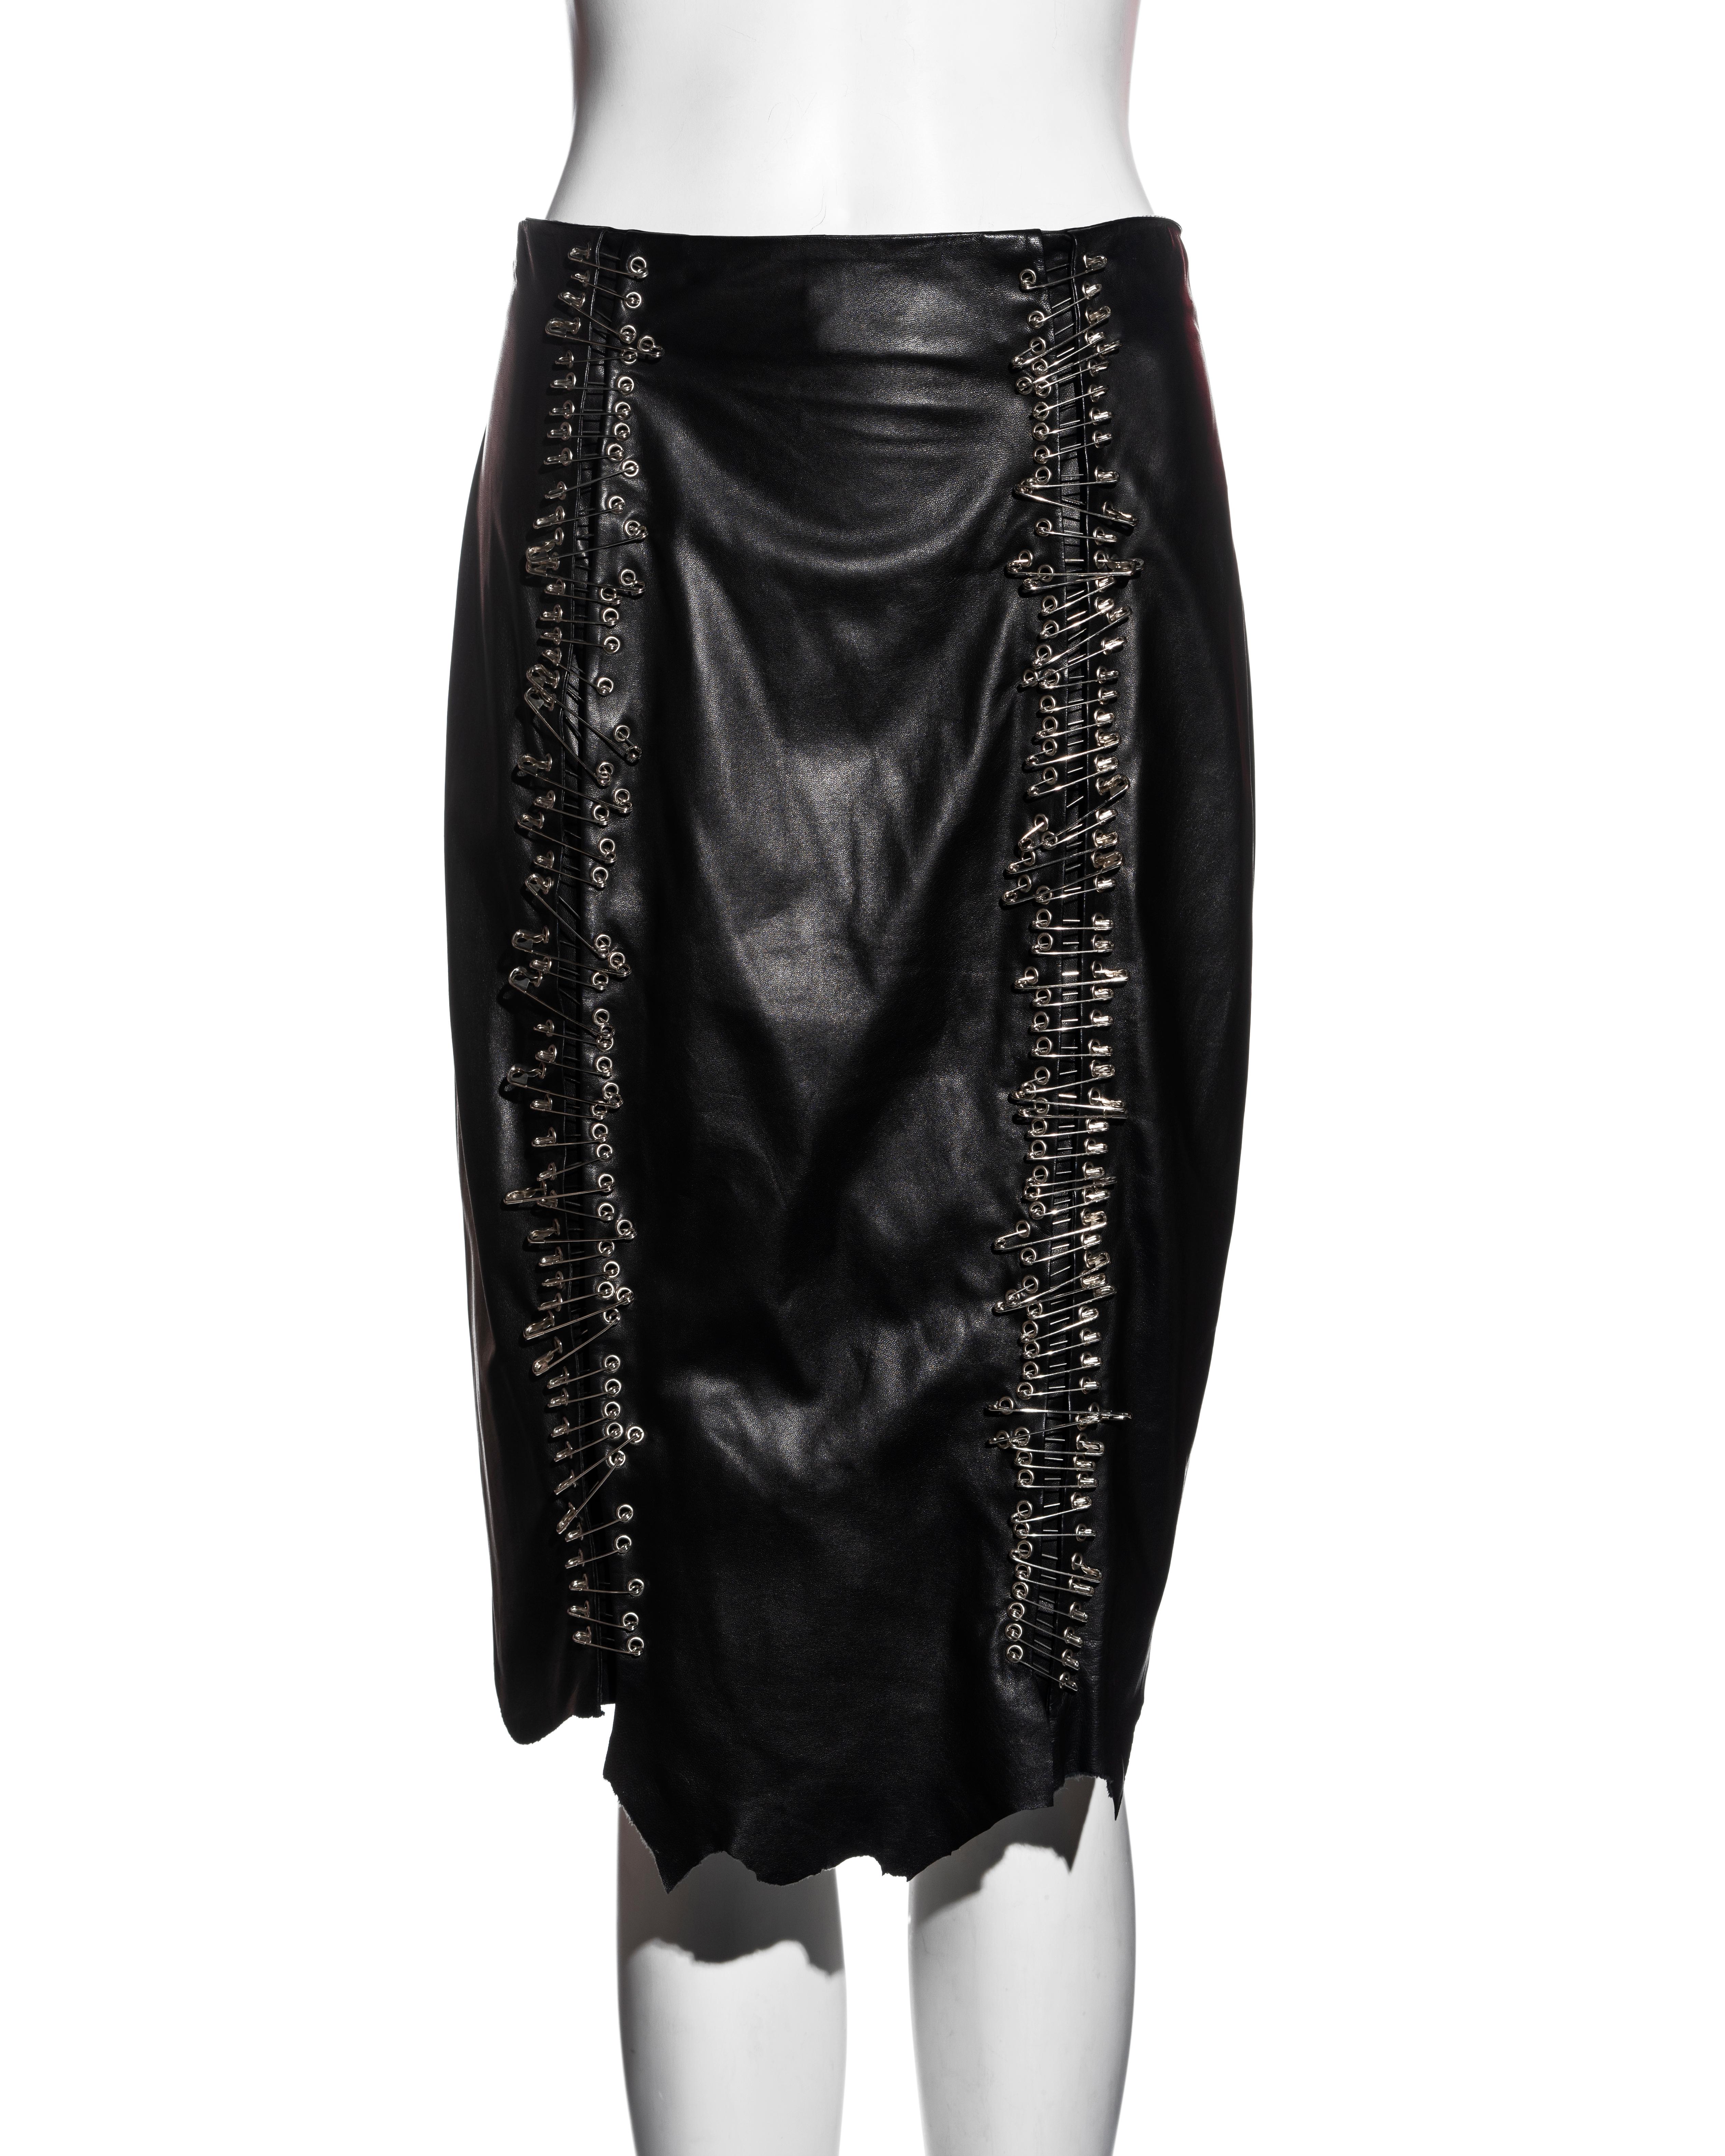 ▪ Balmain black leather safety-pin knee-length skirt 
▪ Designed by Christophe Decarnin  
▪ 2 rows of safety-pins at the front openings
▪ Raw-edge hemline  
▪ Silver metal zipper at centre-back  
▪ FR 40 - UK 12- US 8 
▪ Spring-Sumer 2011